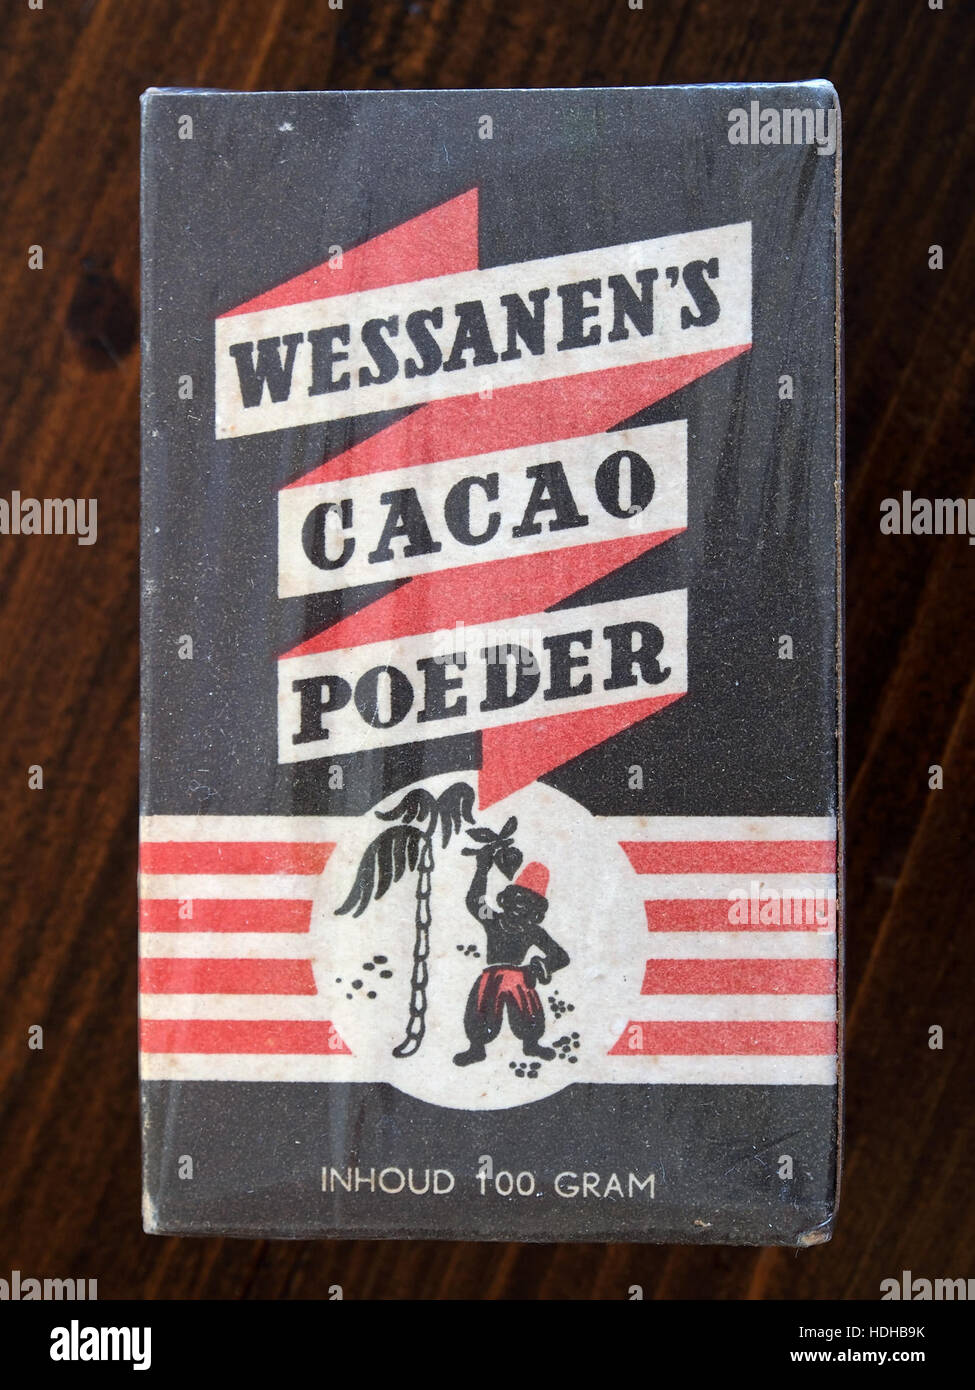 Cacao Wessanens Poeder 100 gr pic1 Foto Stock